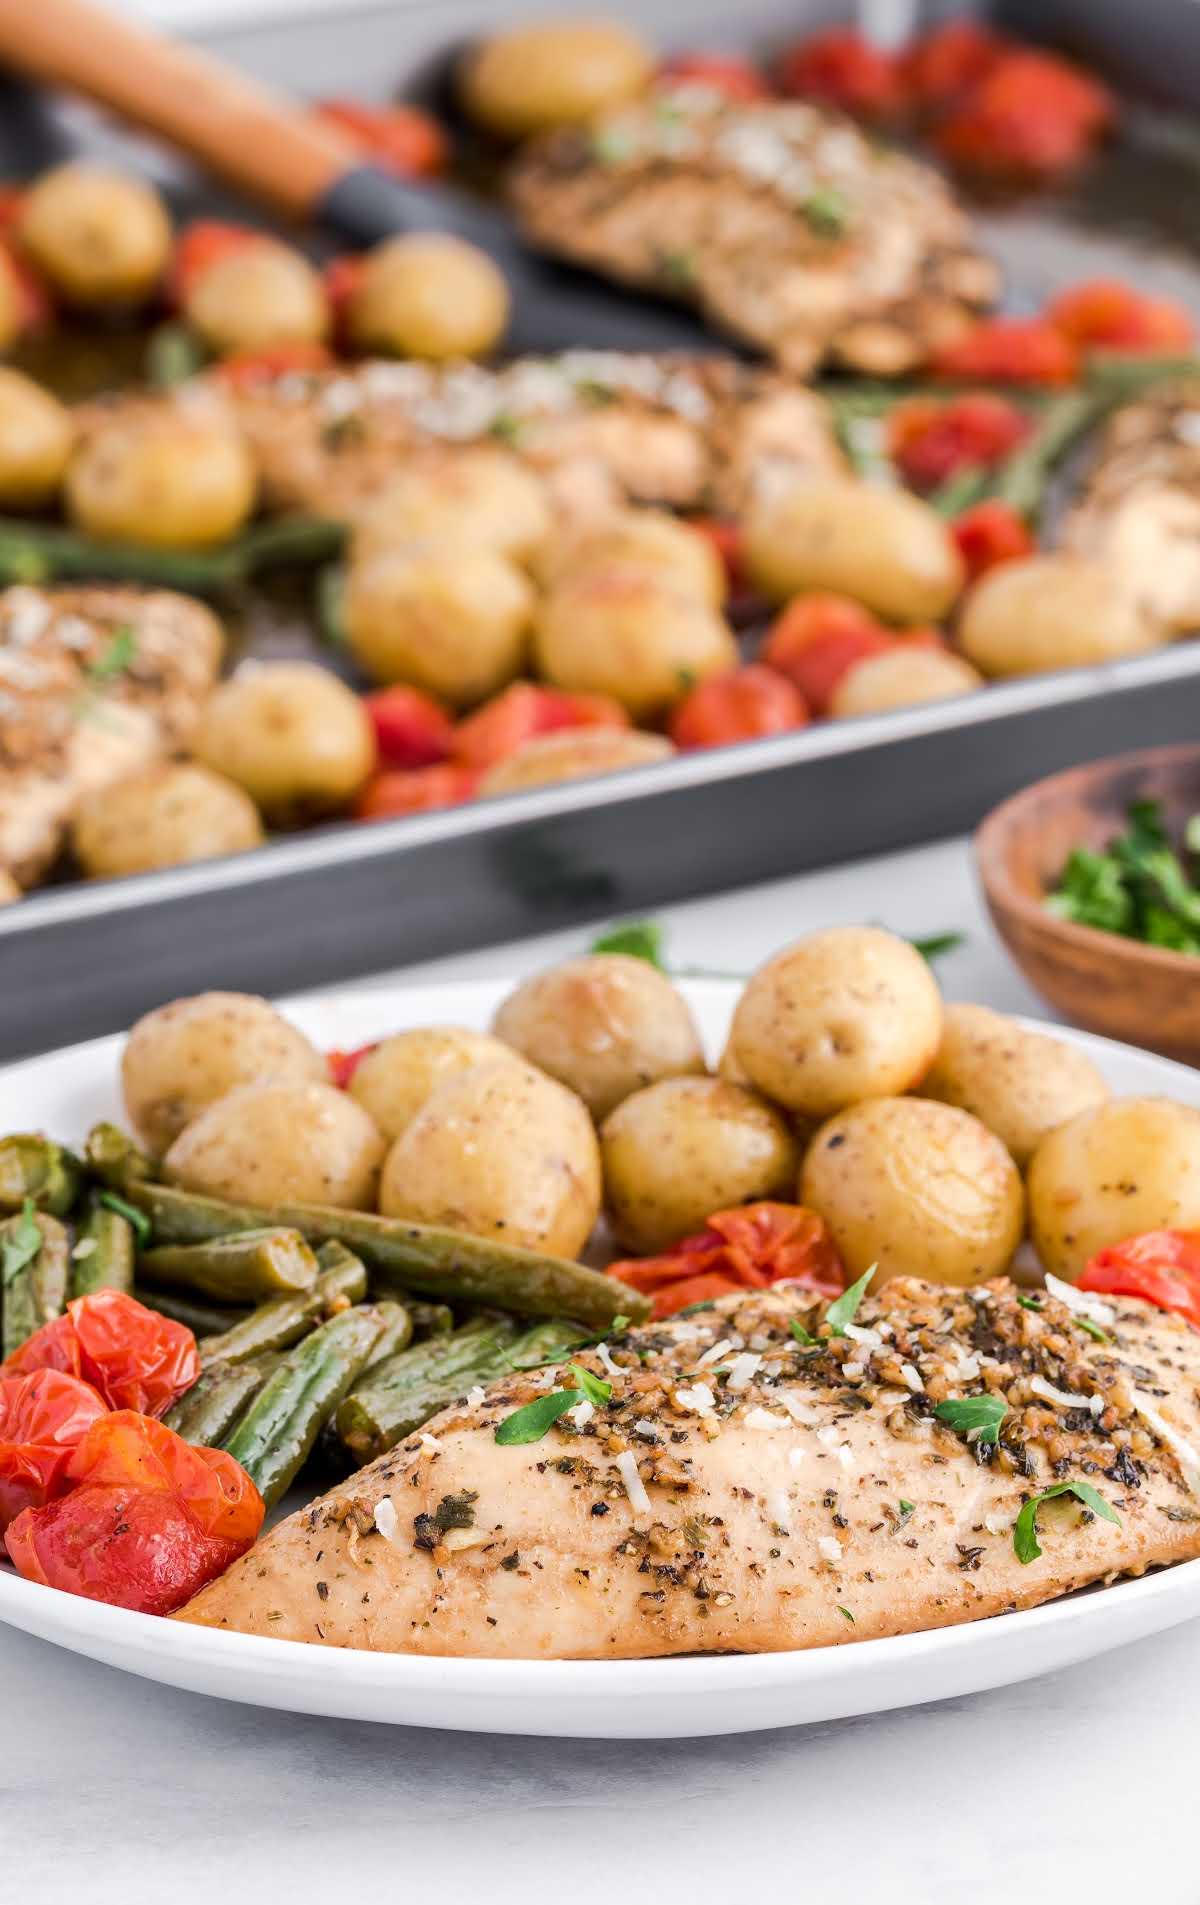 close up shot of a plate of baked chicken, potatoes, tomatoes, and green beans